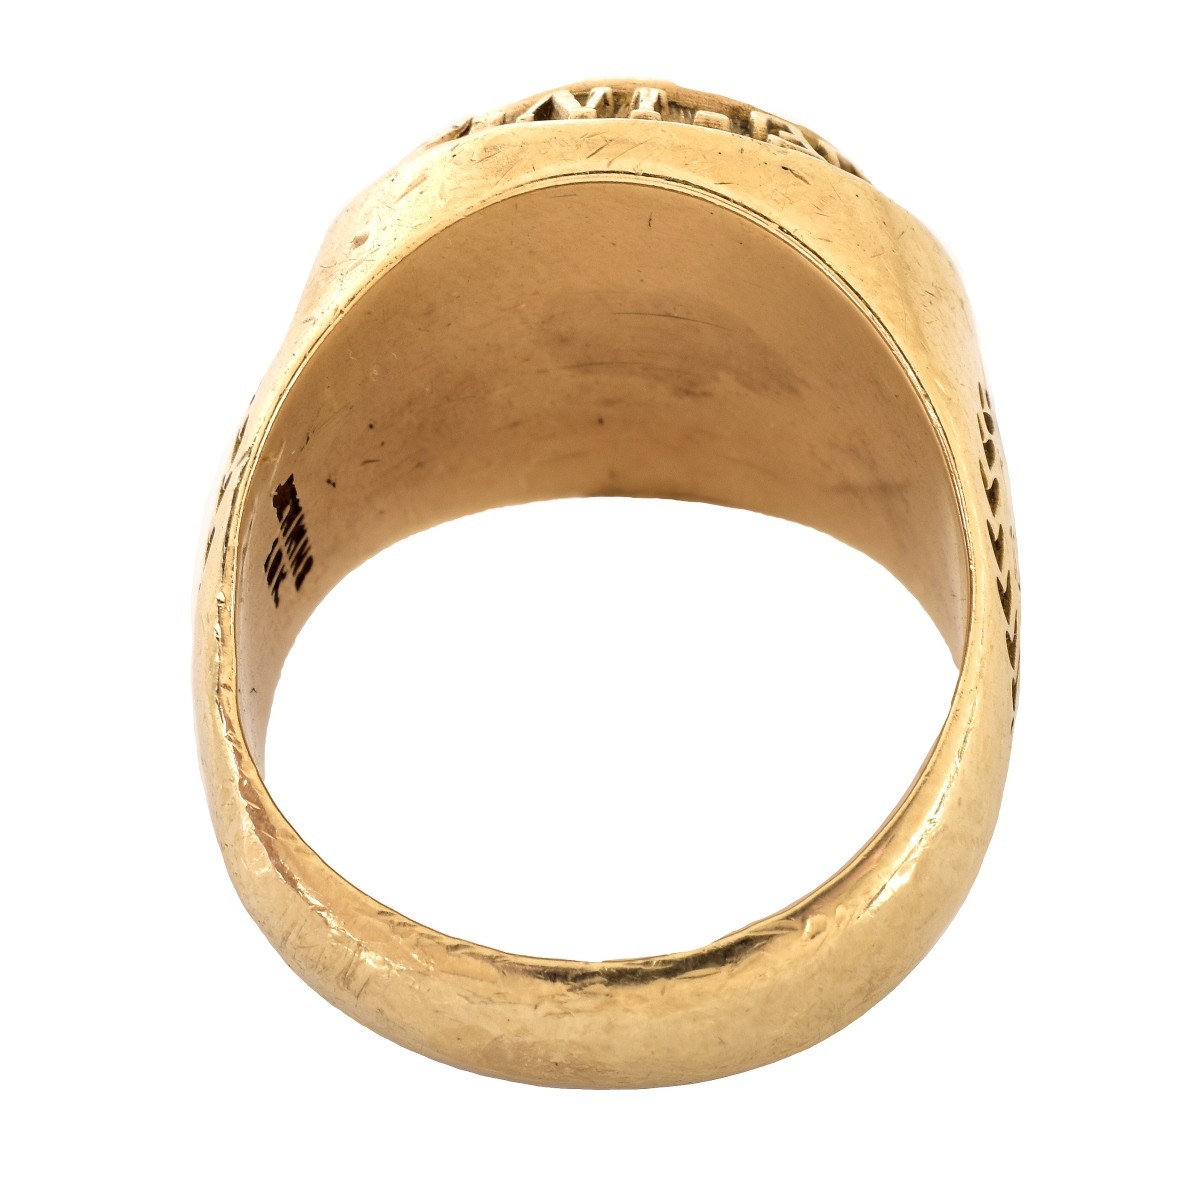 Vintage 10K Gold Hole in One Ring - Image 4 of 7